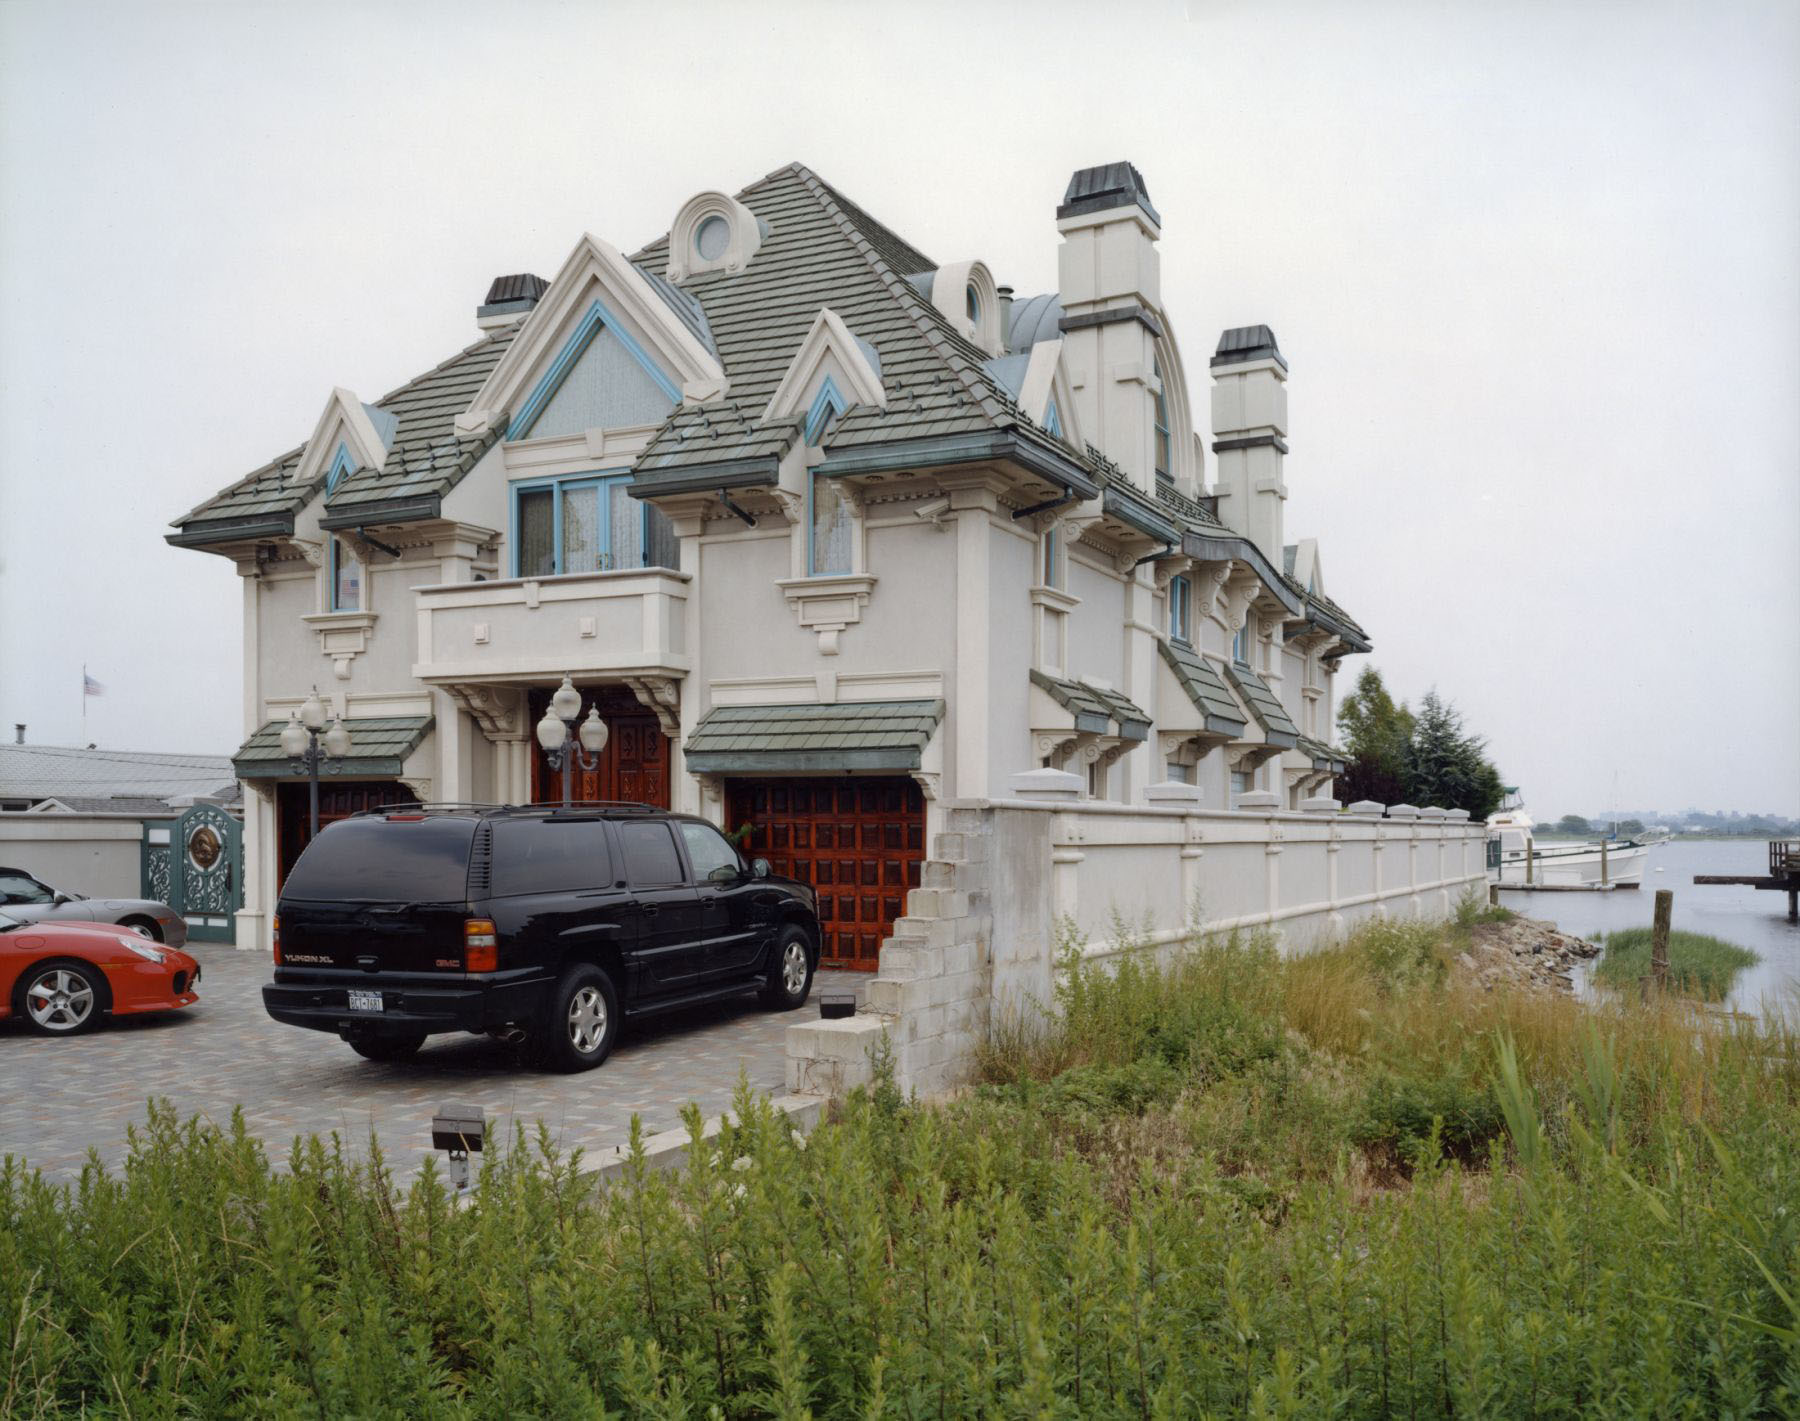 House on Jamaica Bay , Broad Channel, Queens , September 2004